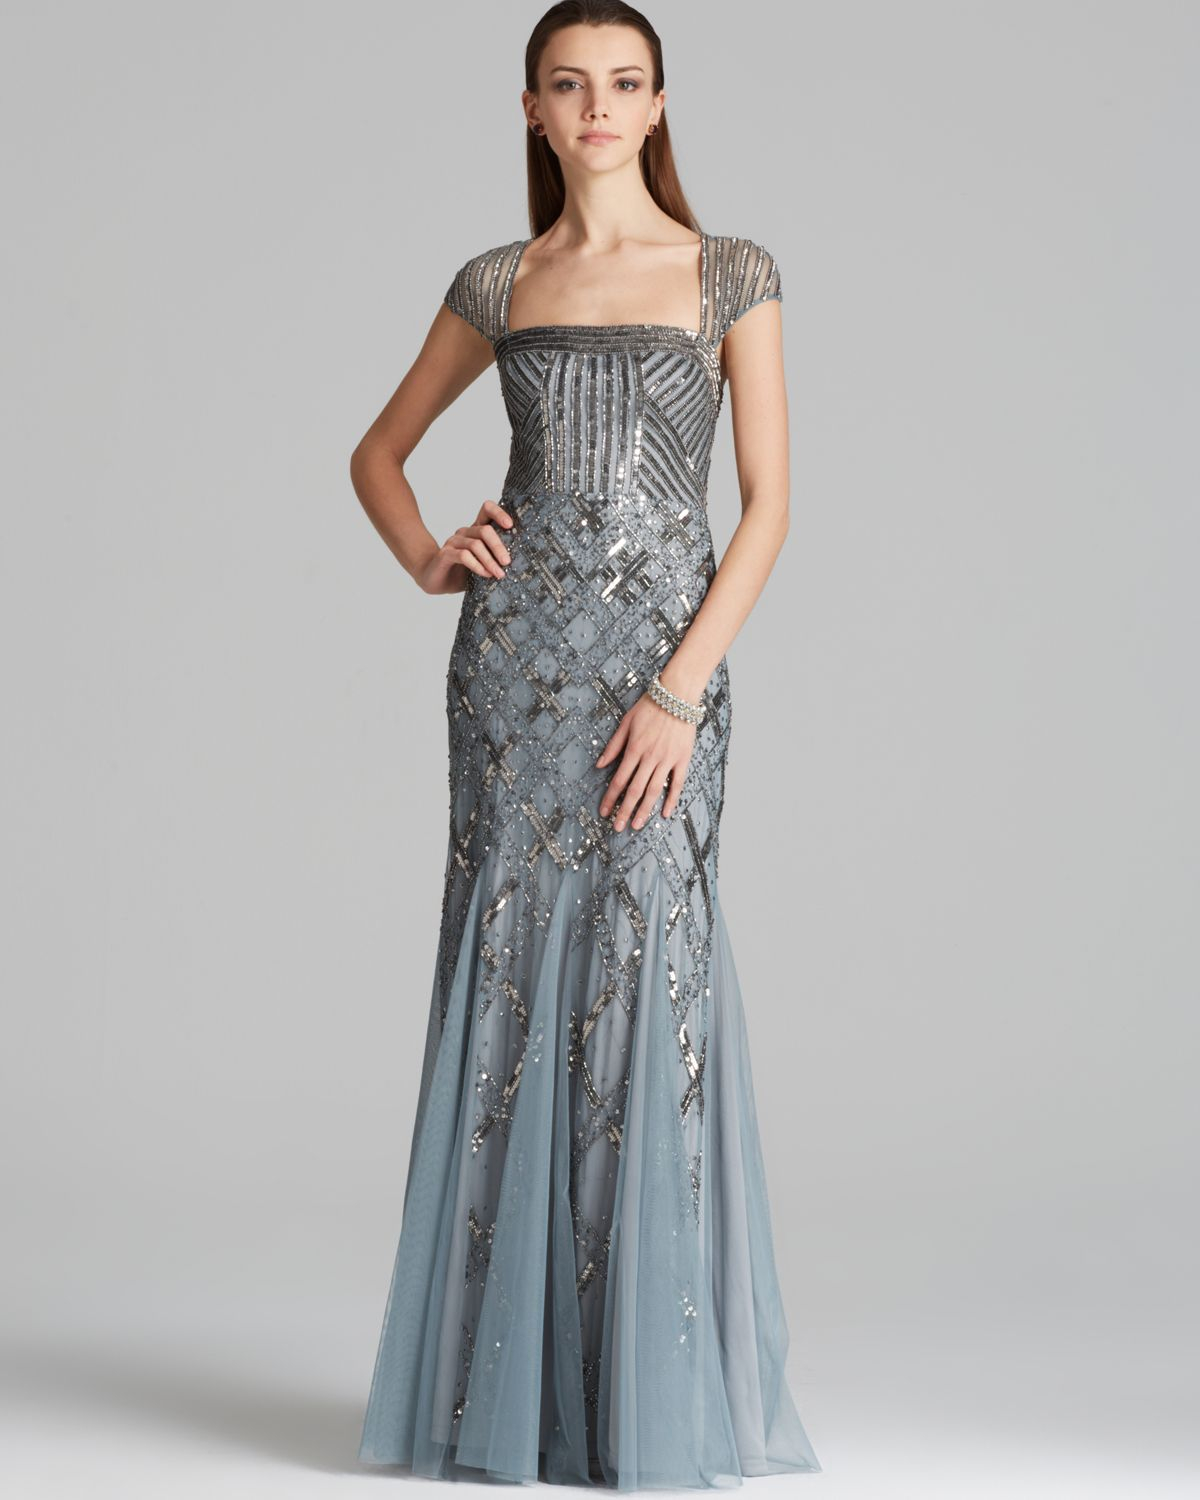 Lyst - Adrianna papell Gown Cap Sleeve Beaded in Blue